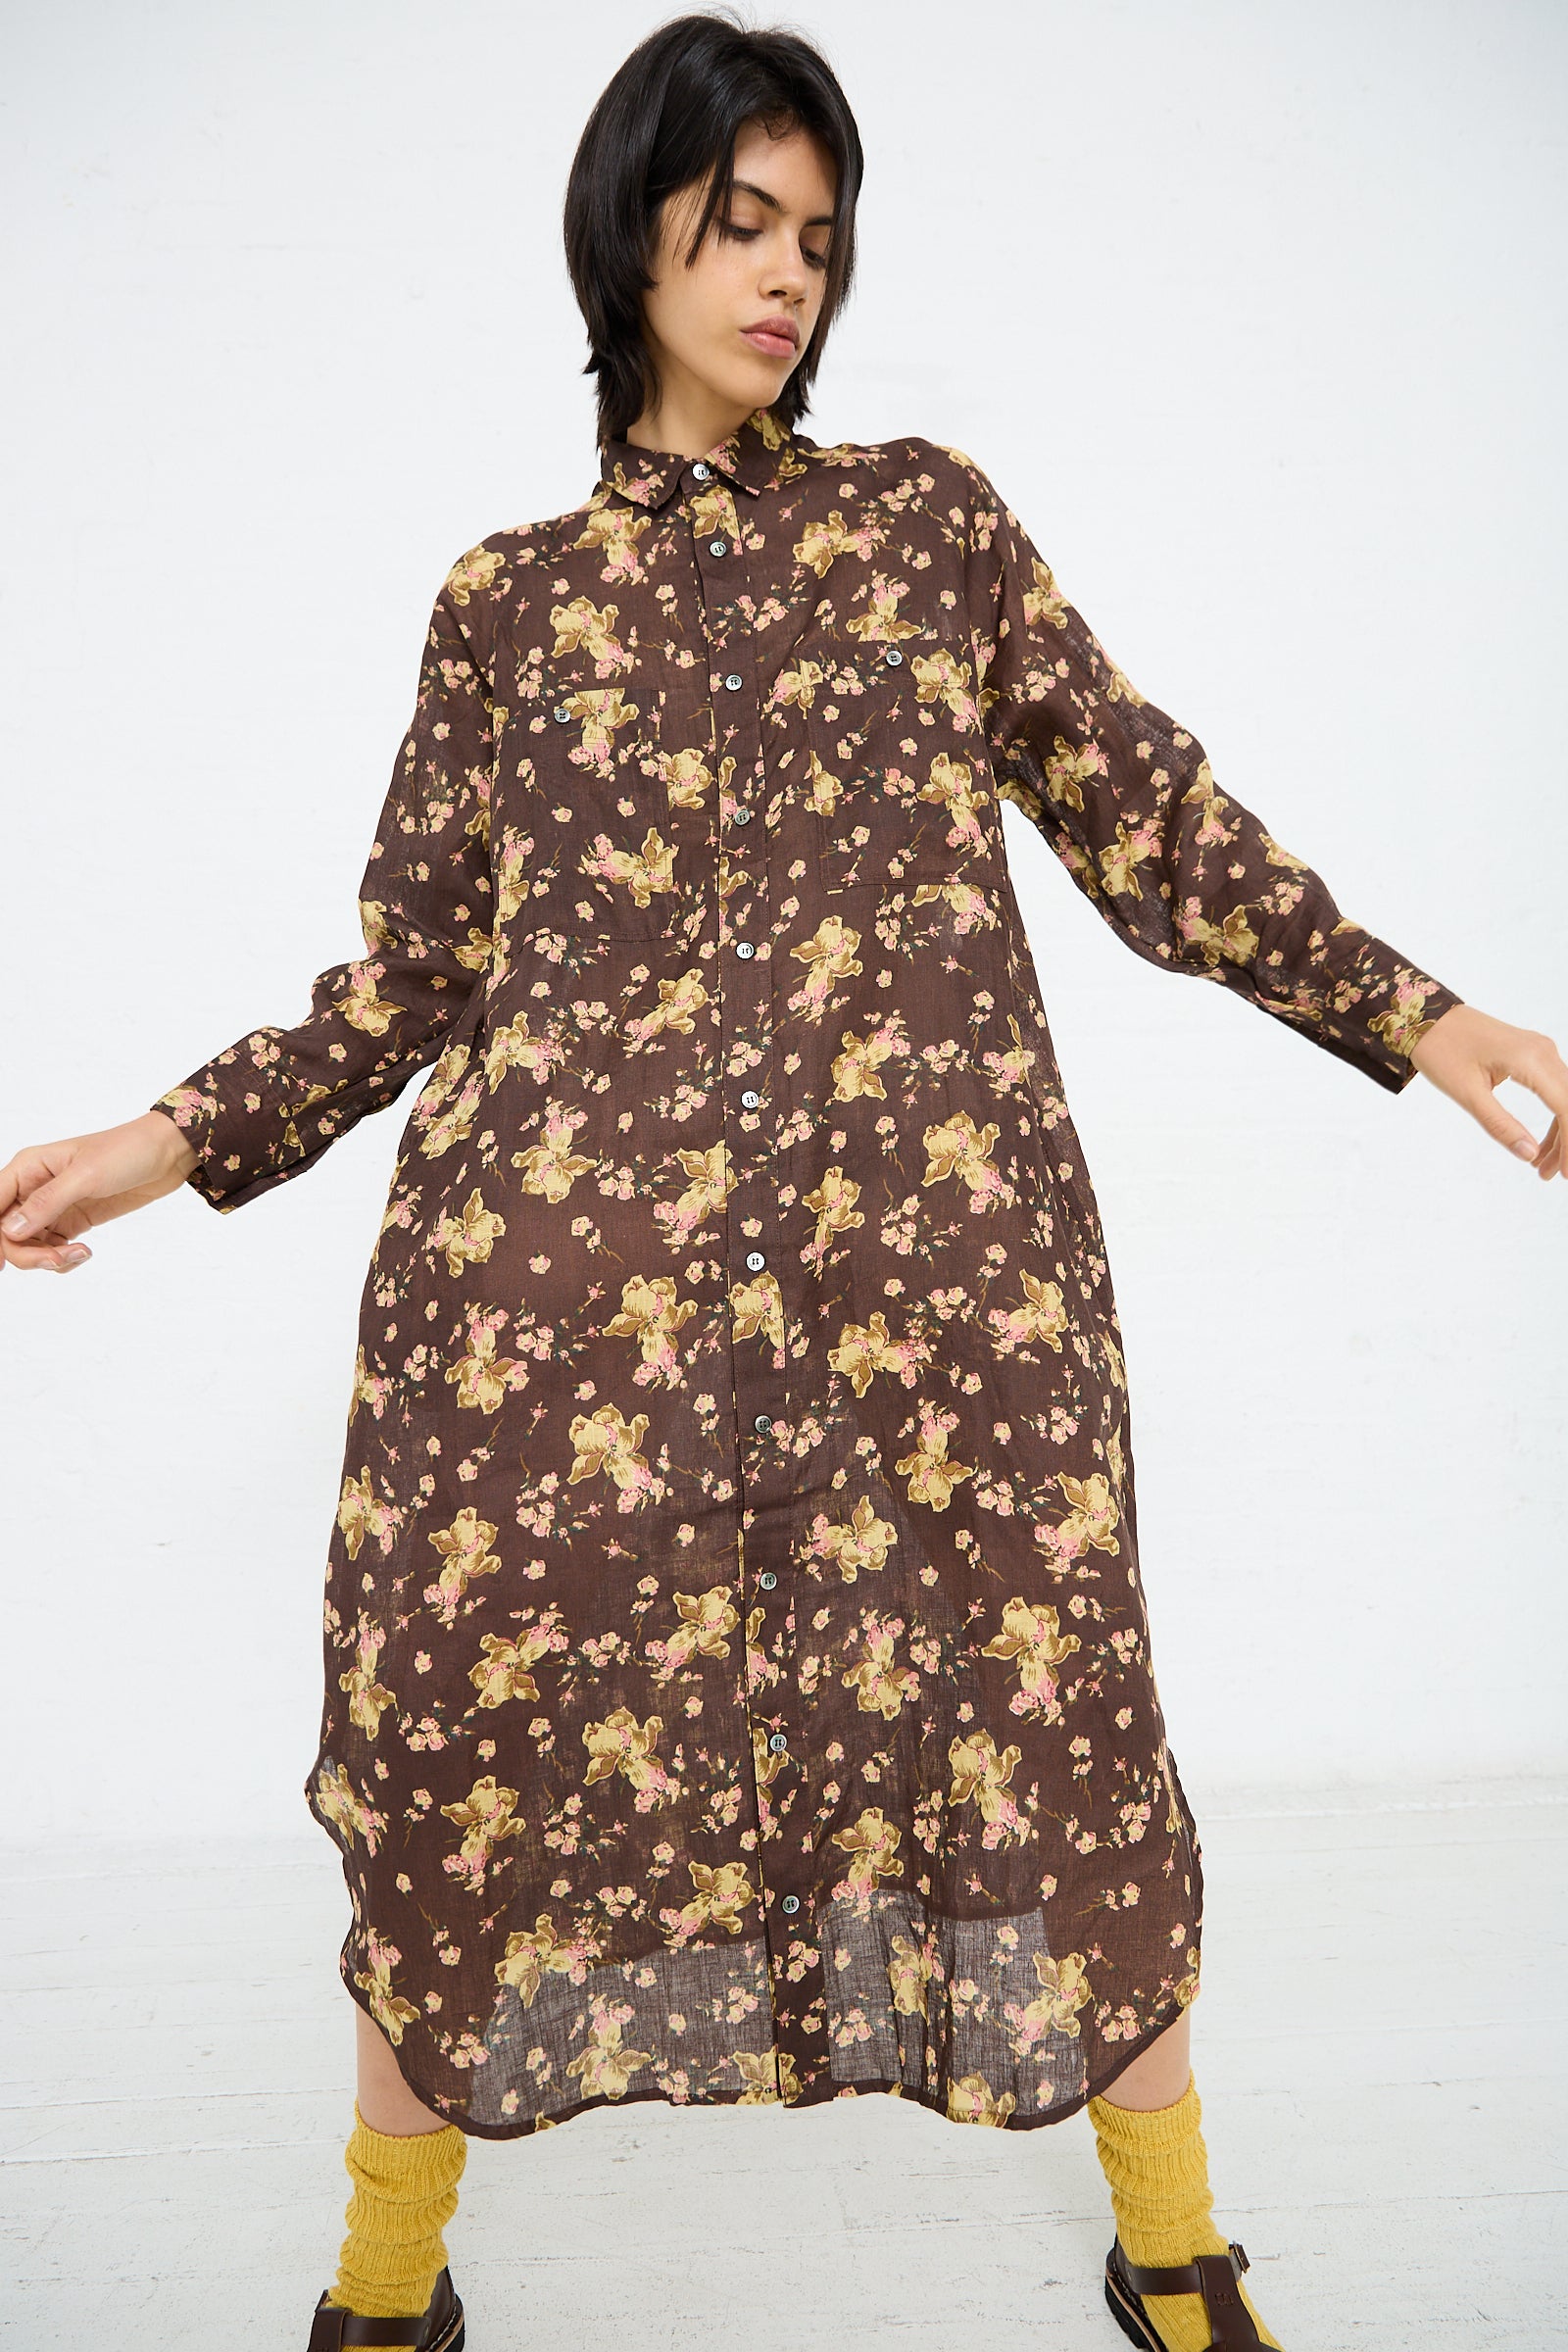 Person wearing a long-sleeved, Ichi Antiquités Linen Flower Print Dress in Brown stands against a plain white background. They have mustard-colored socks and black shoes.